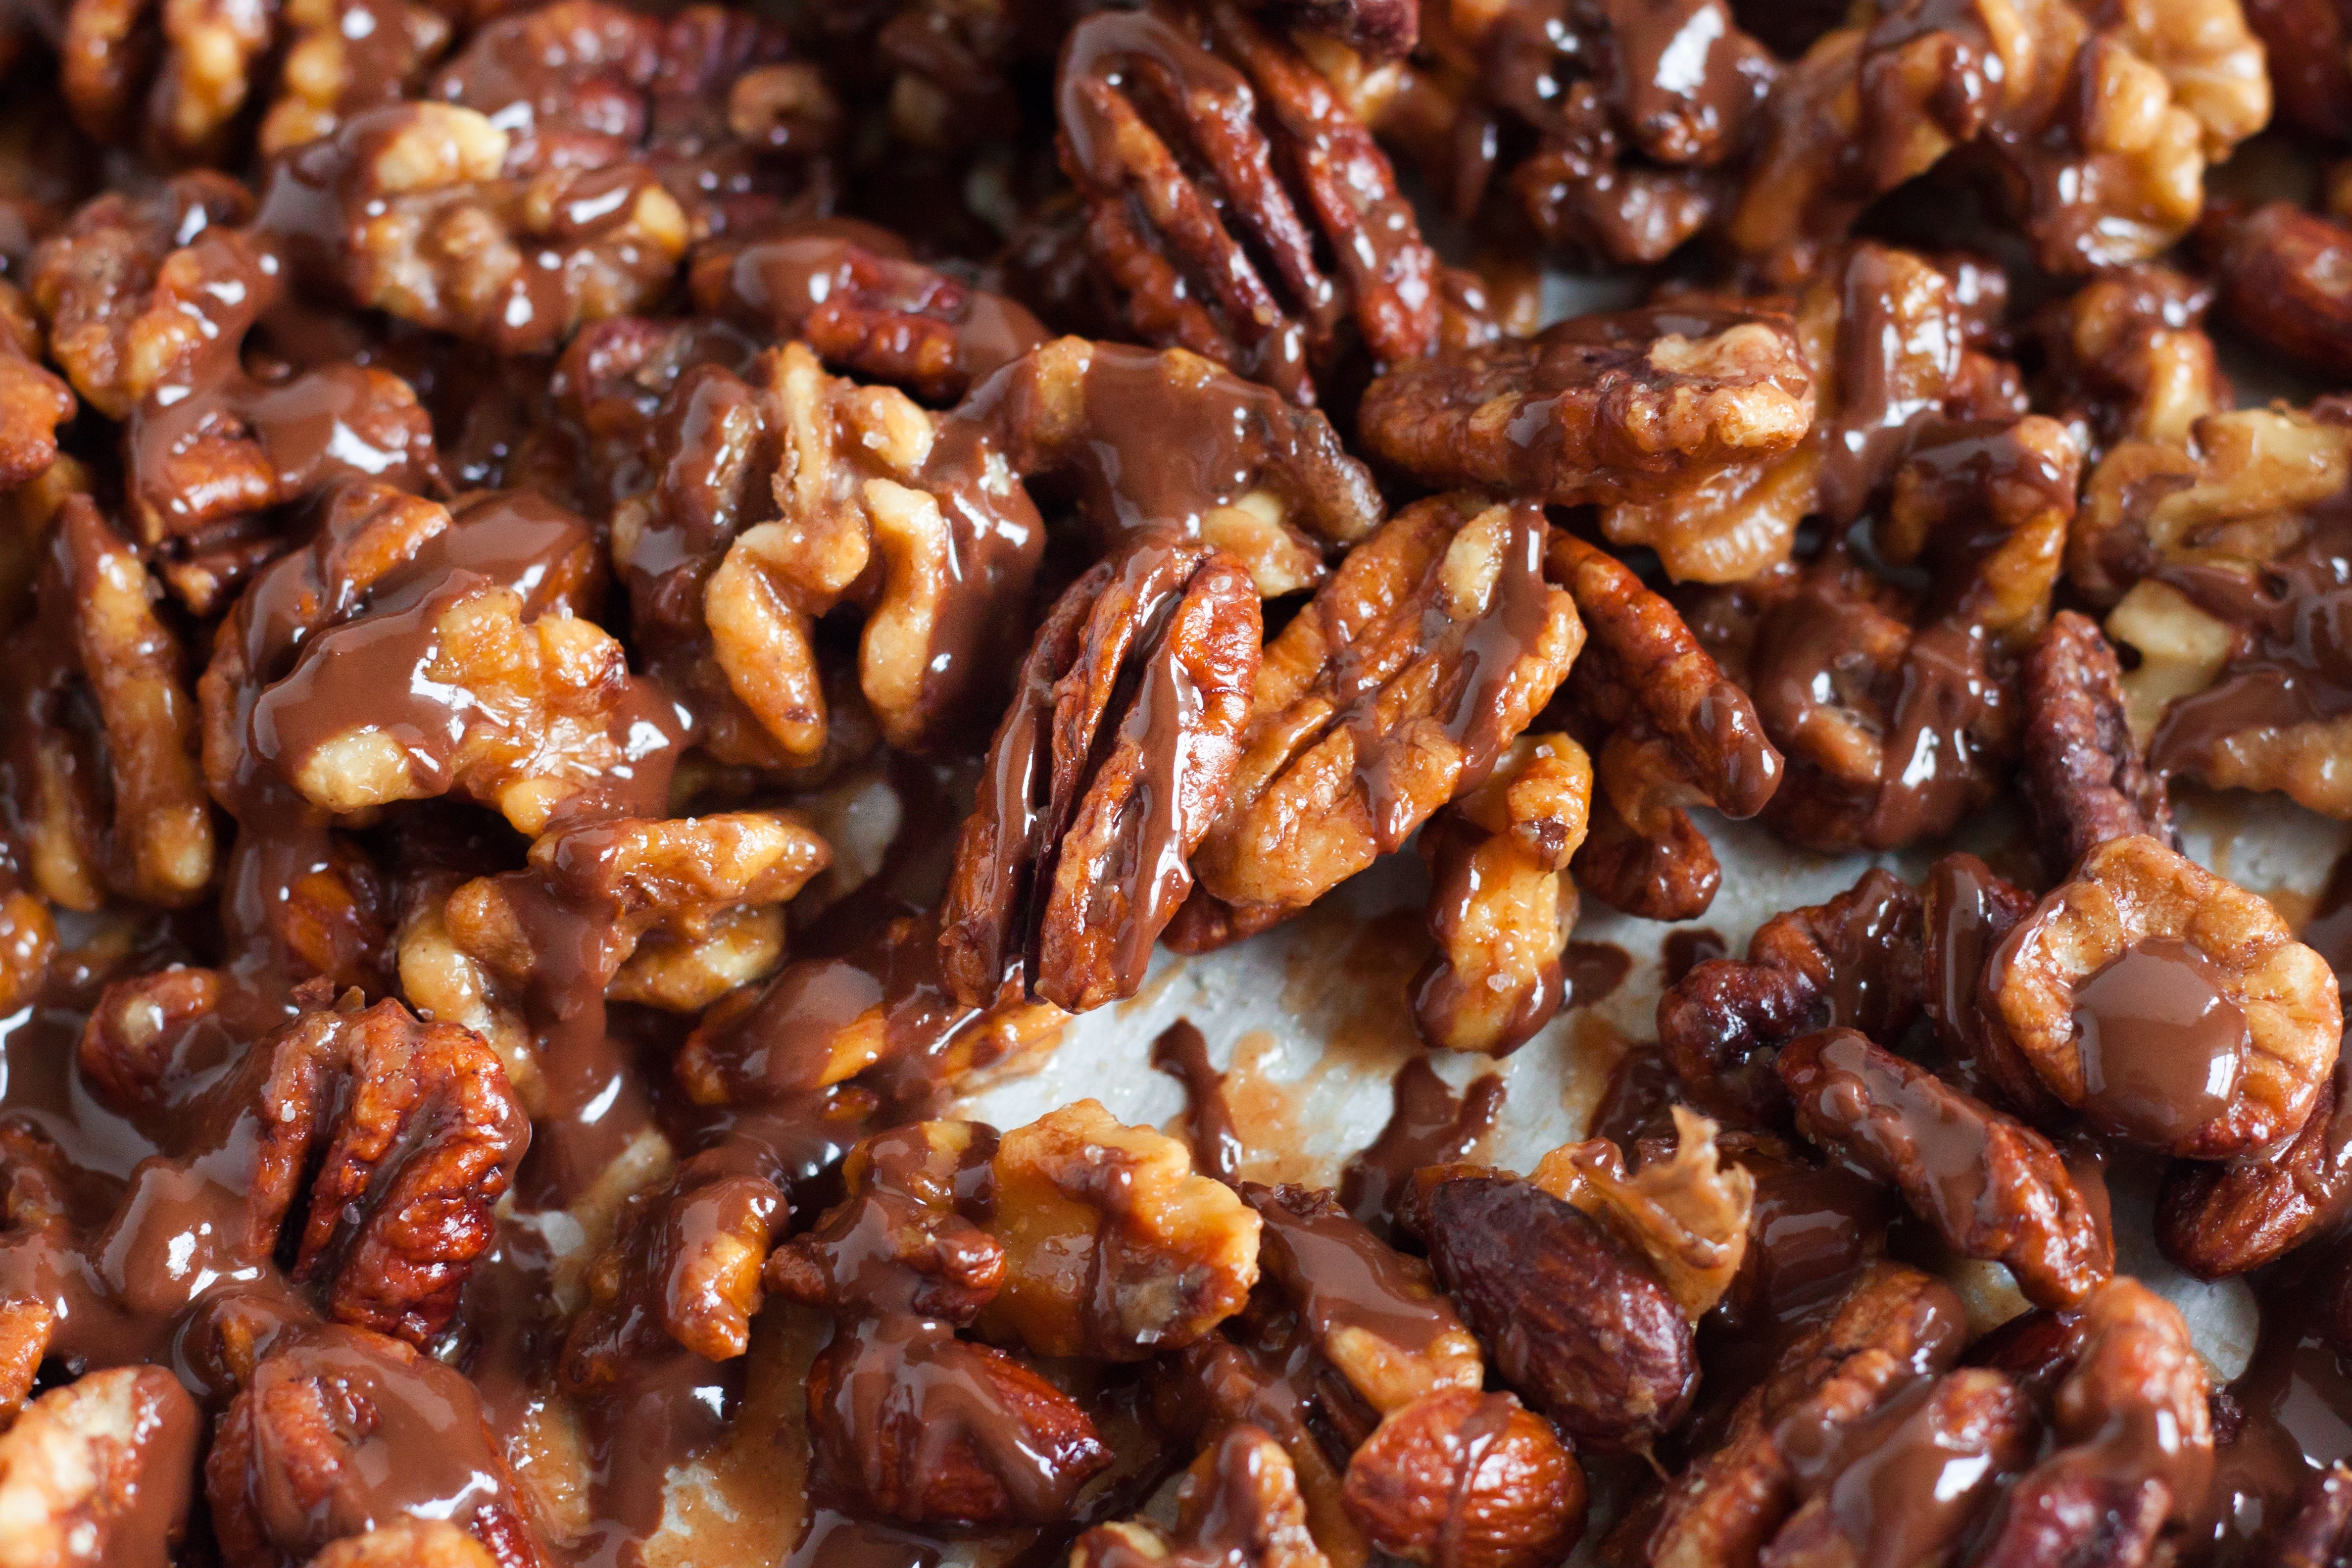 baking sheet with pecans, almonds, and walnuts drizzled with chocolate.